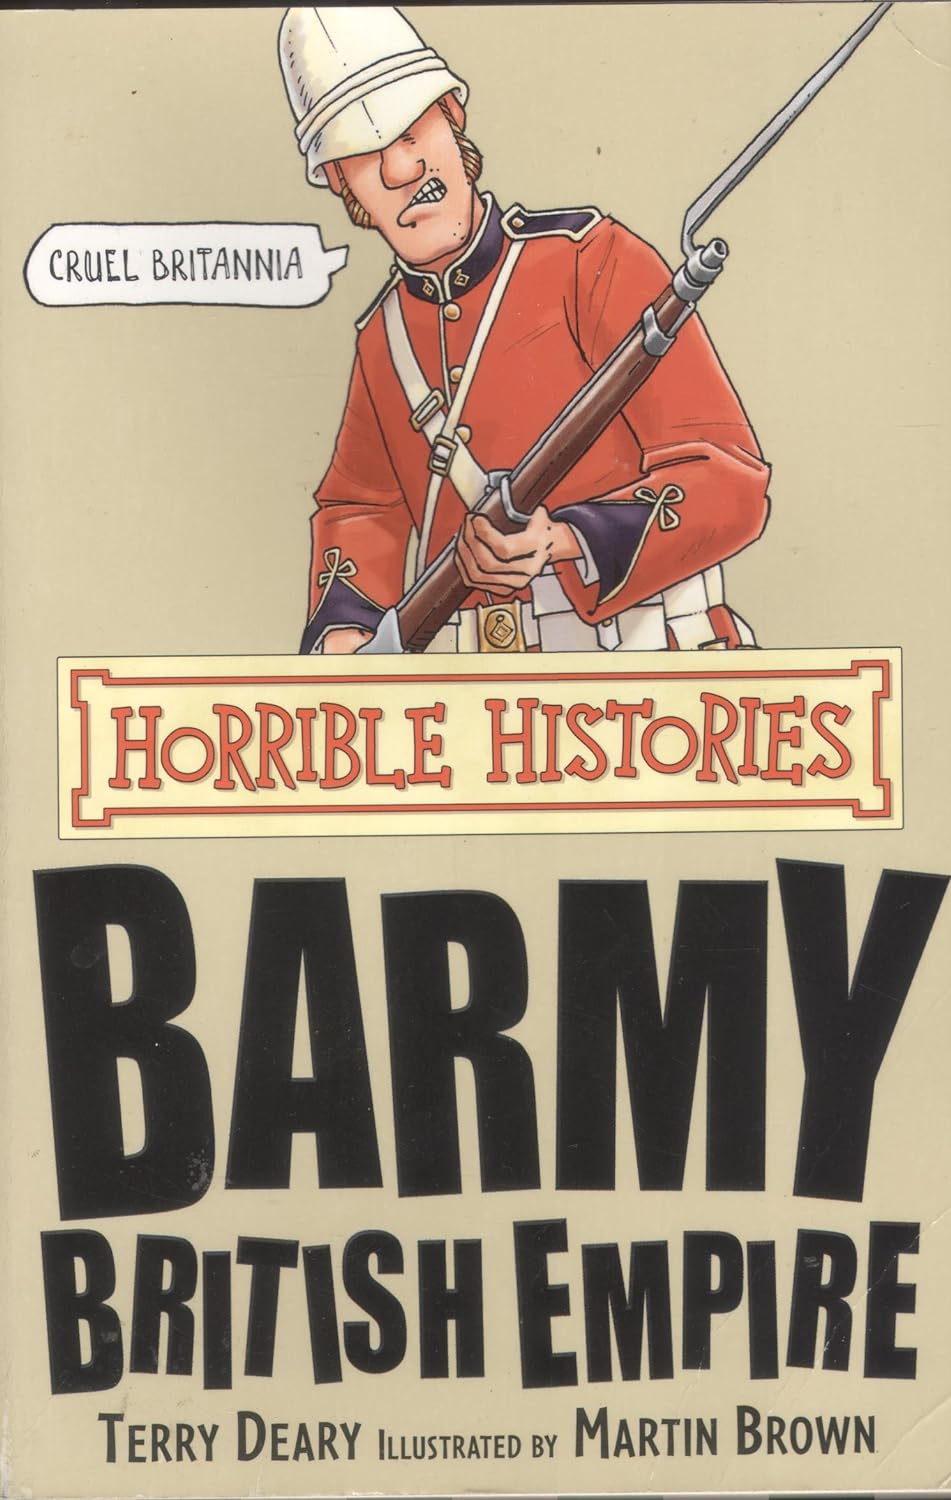 Horrible Histories - Barmy British Empire by Terry Deary